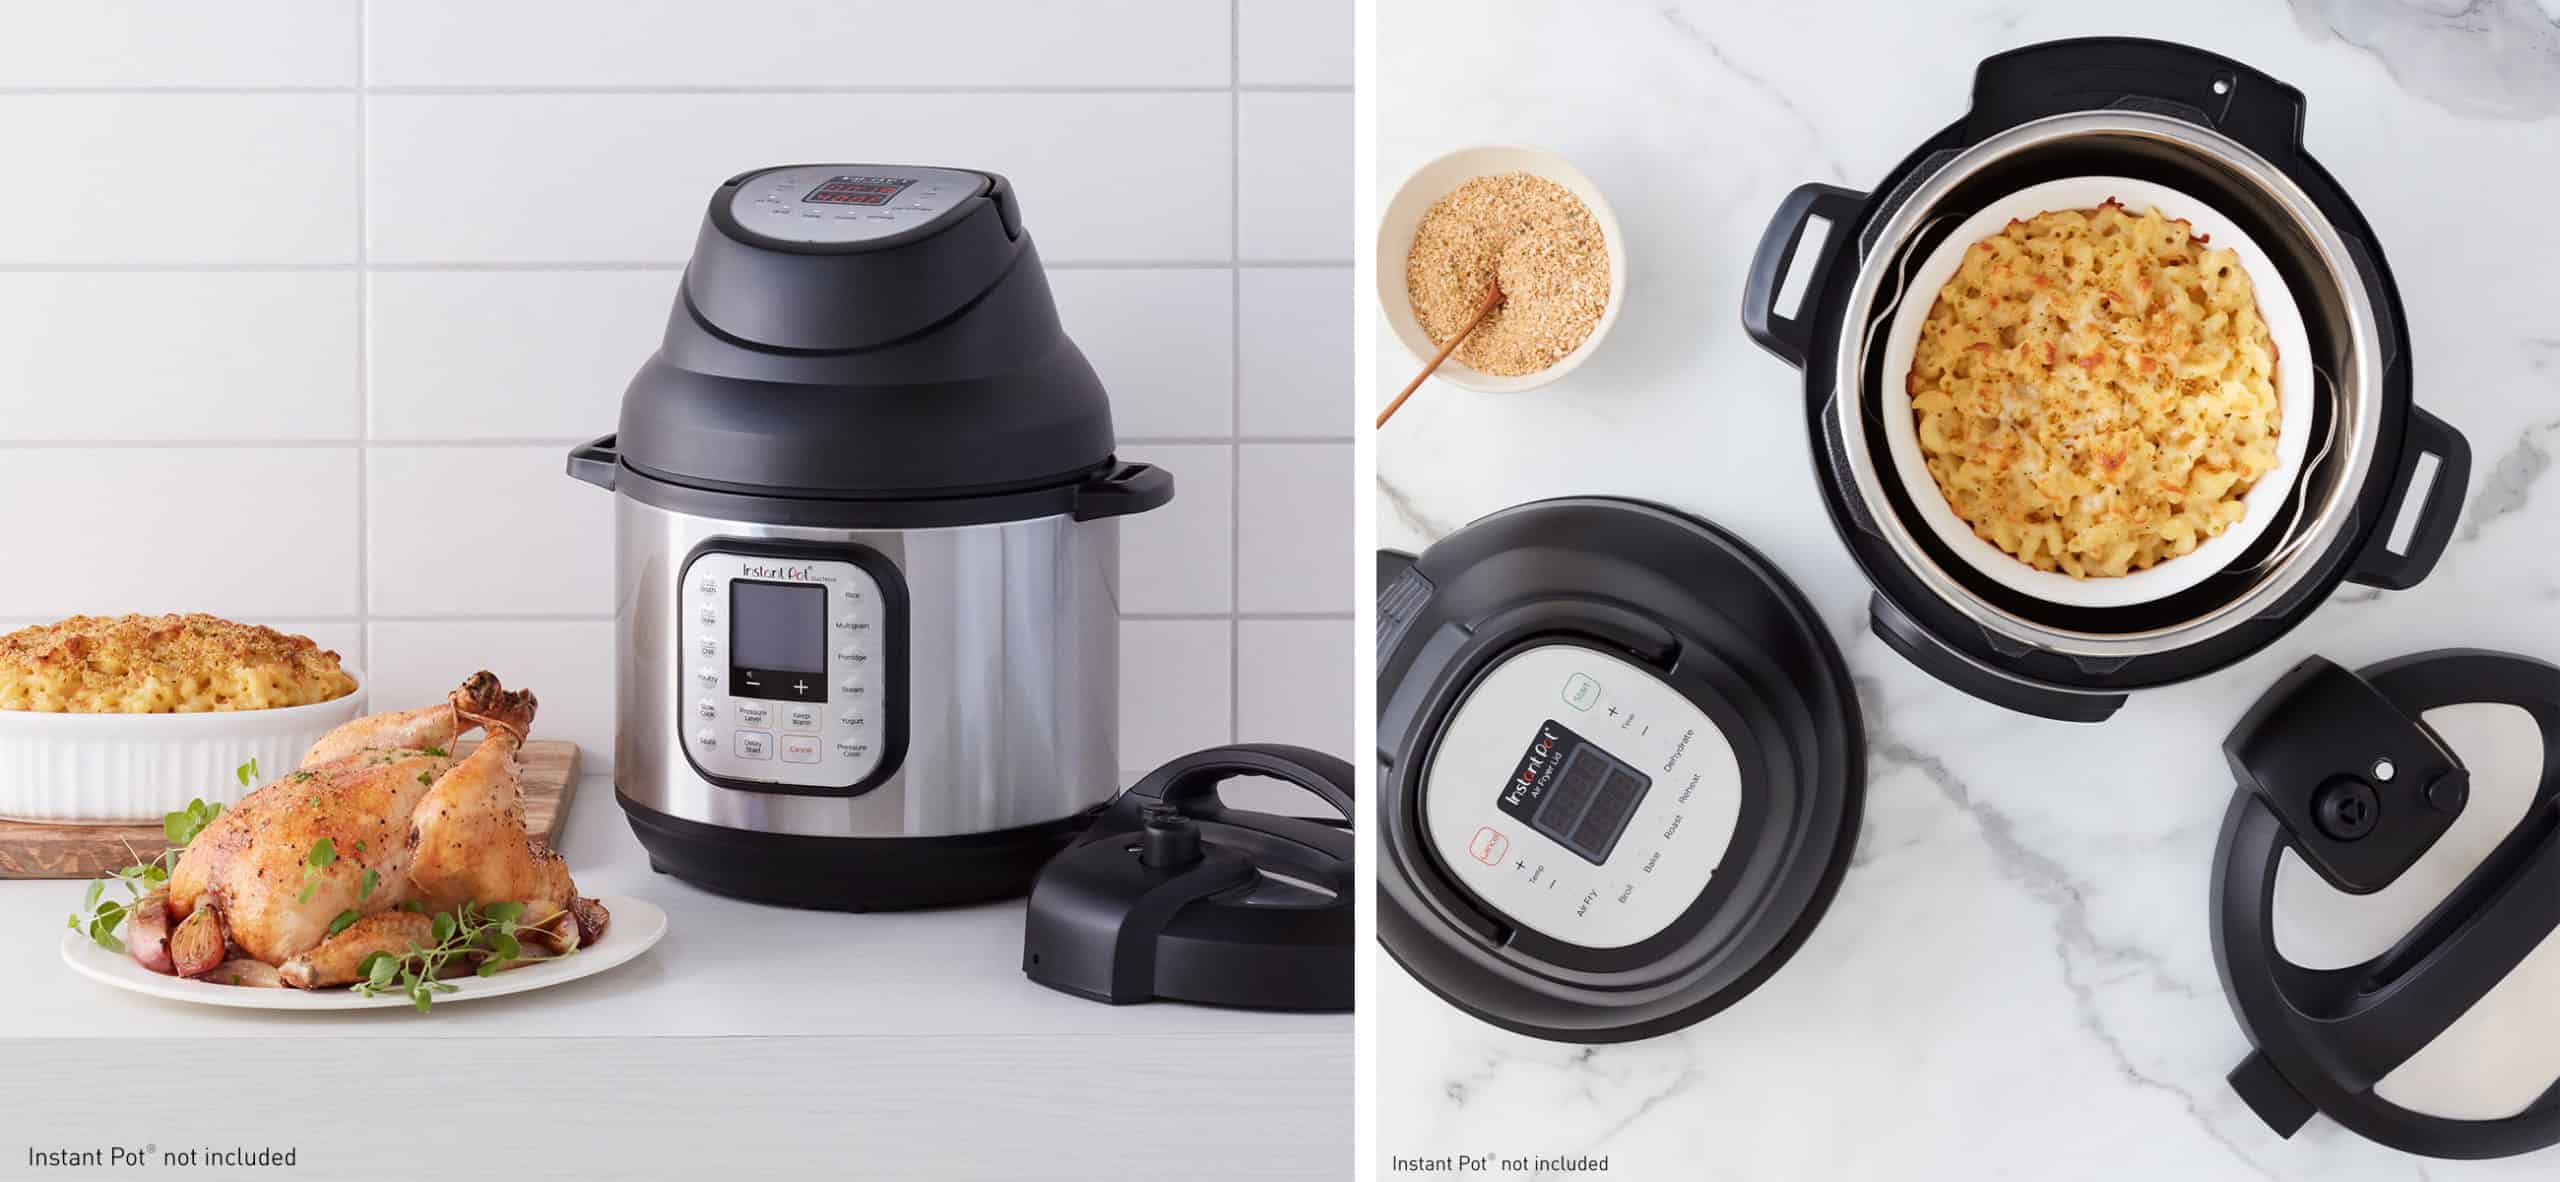 Instant pot air fryer lid considerate service.